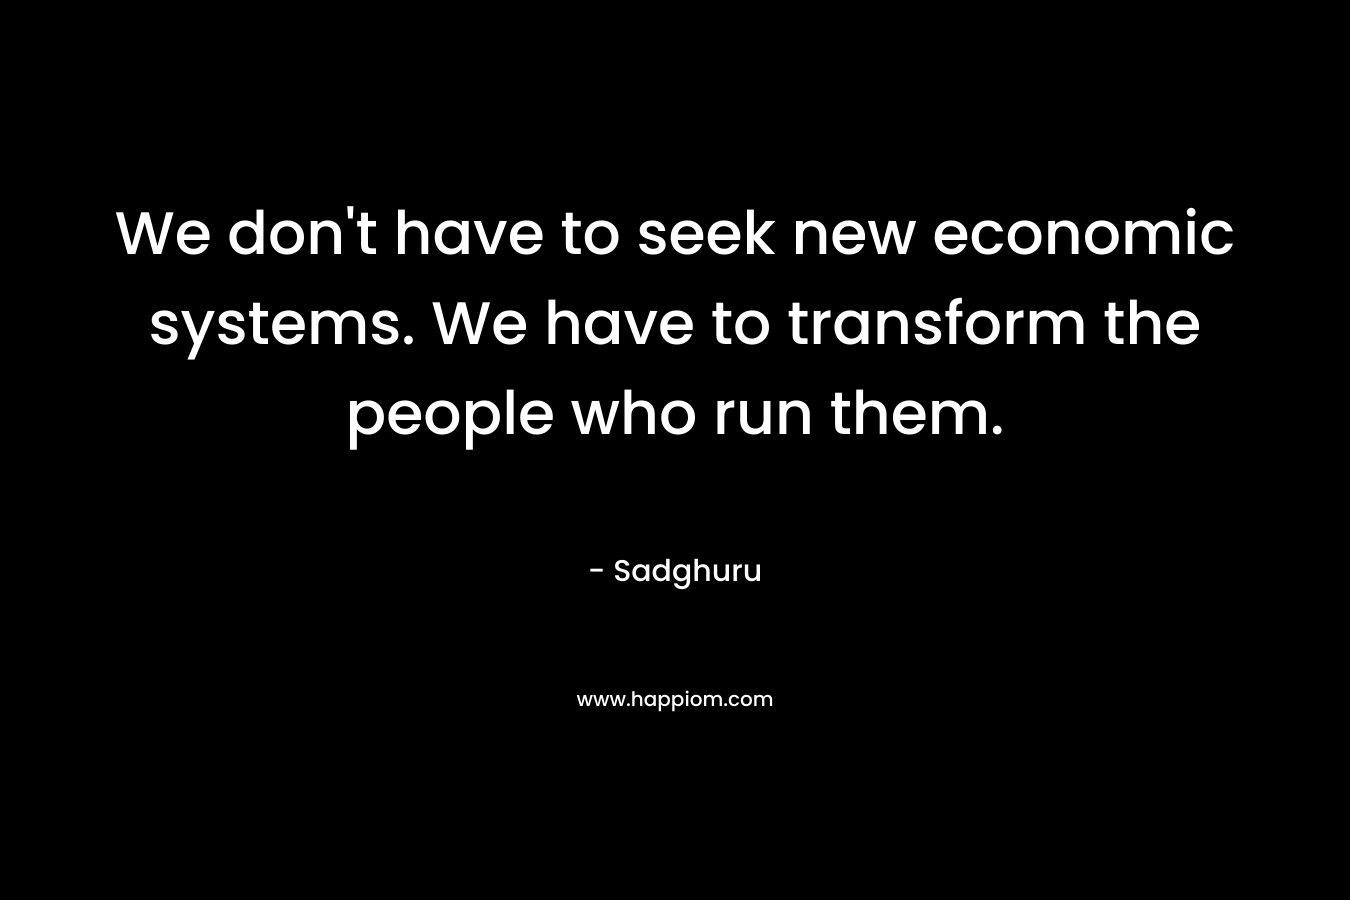 We don’t have to seek new economic systems. We have to transform the people who run them. – Sadghuru